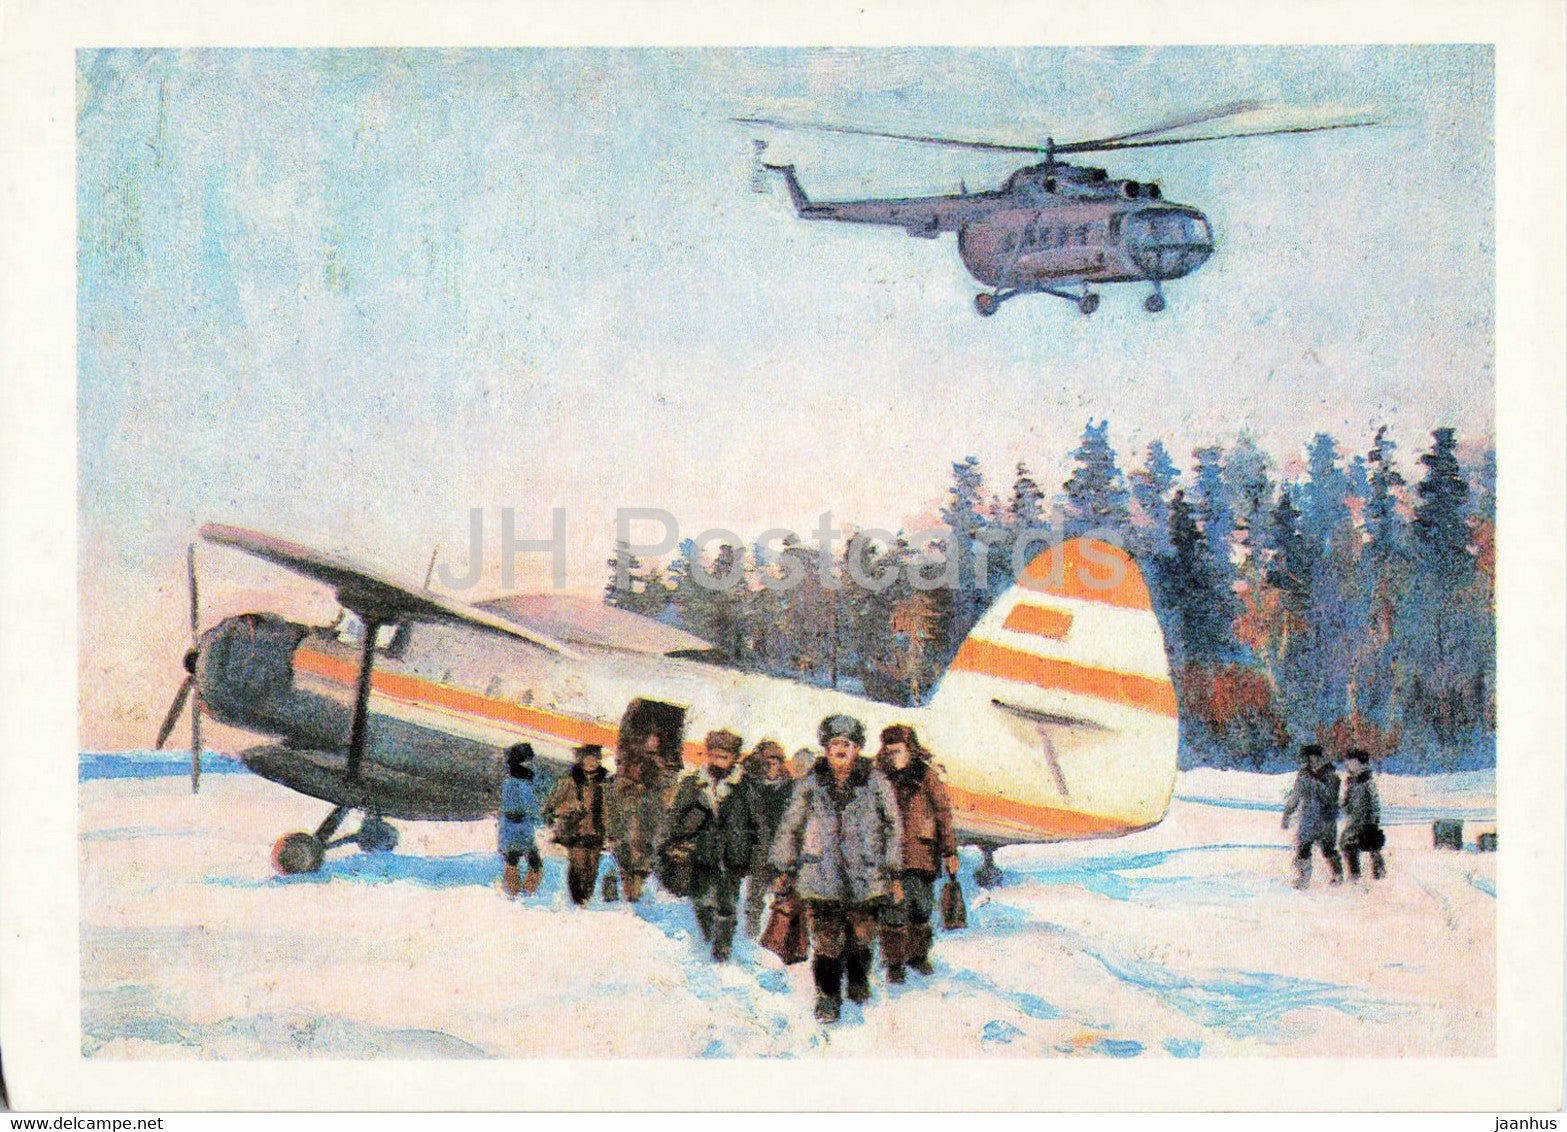 illustration by M. Sapozhnikov - airplane - helicopter - Tomsk oblast - 1 - 1987 - Russia USSR - unused - JH Postcards